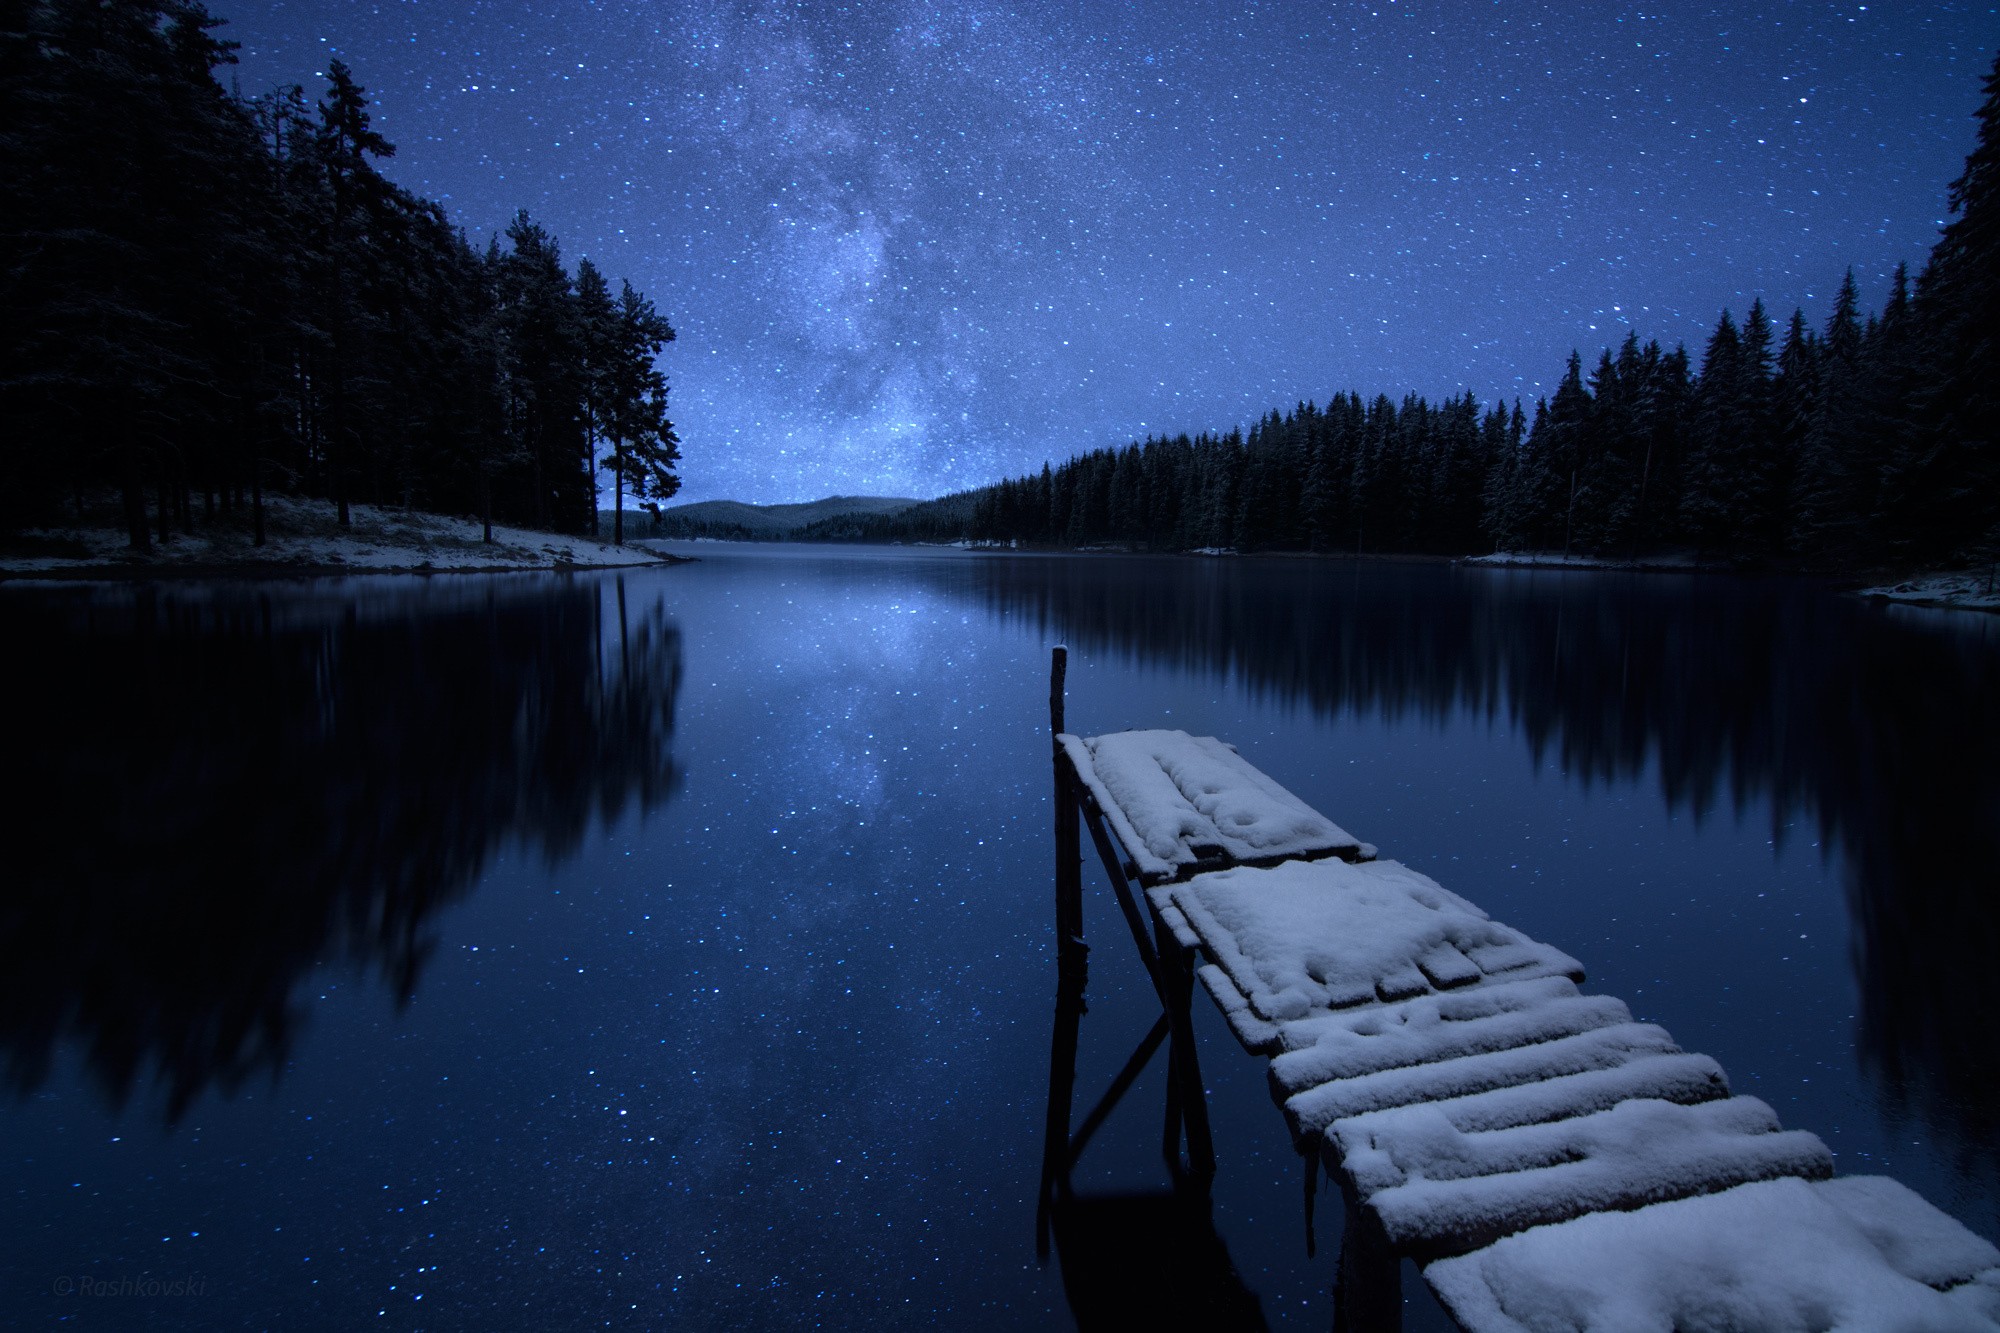 General 2000x1333 landscape snow stars nature cold water night outdoors pier sky reflection